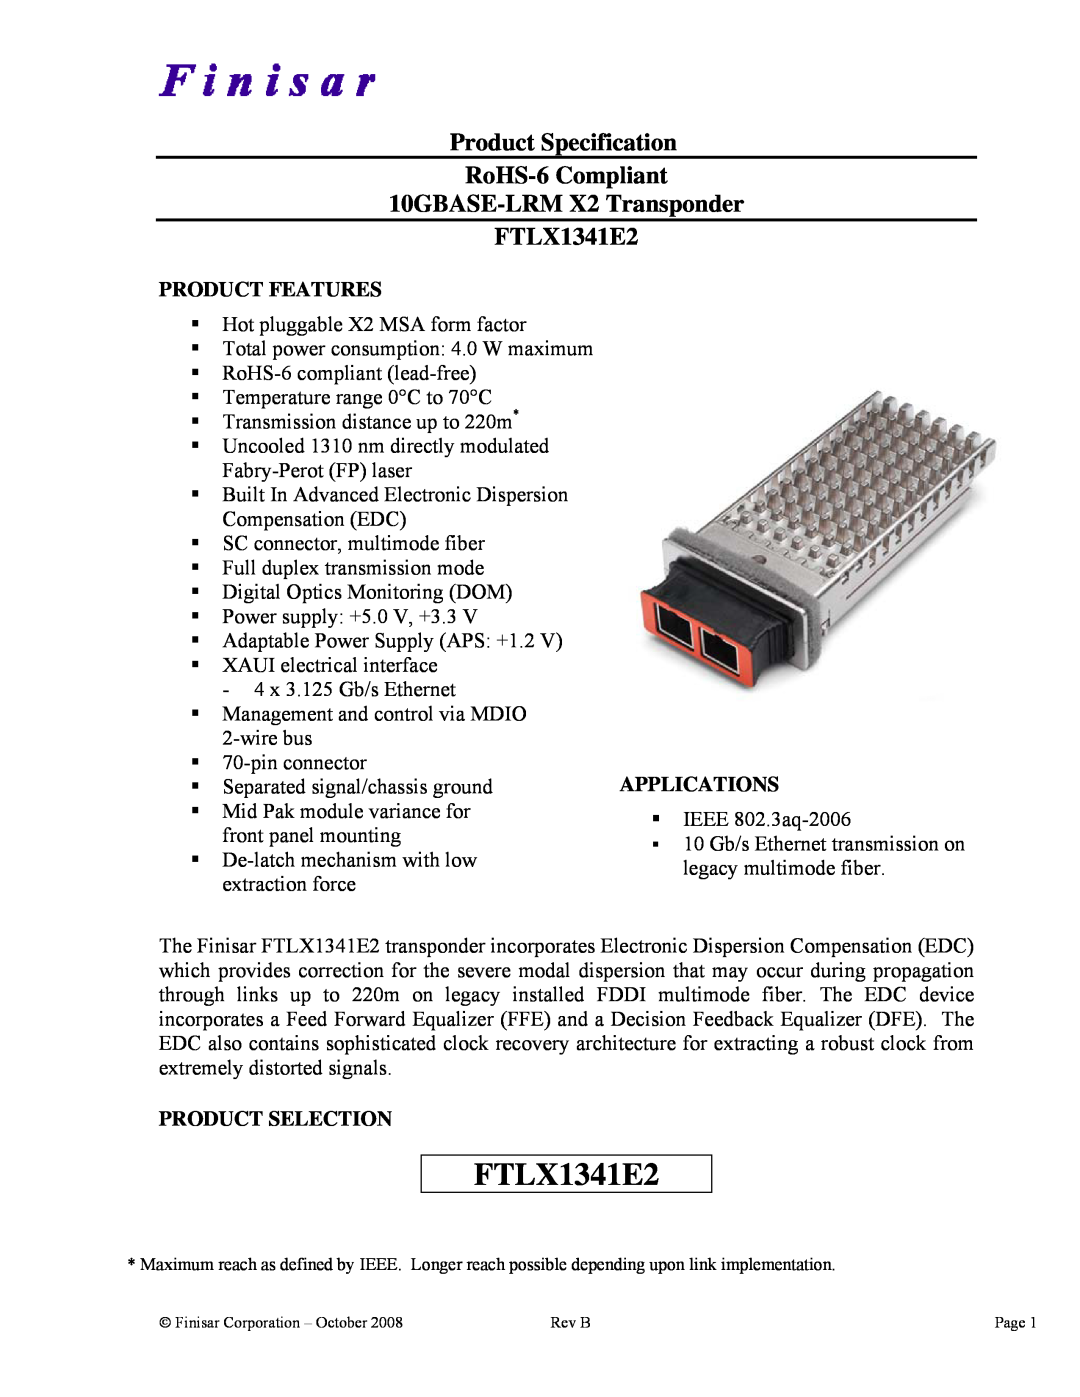 Finisar FTLX1341E2 manual Product Specification RoHS-6 Compliant 10GBASE-LRM X2 Transponder, Product Features 